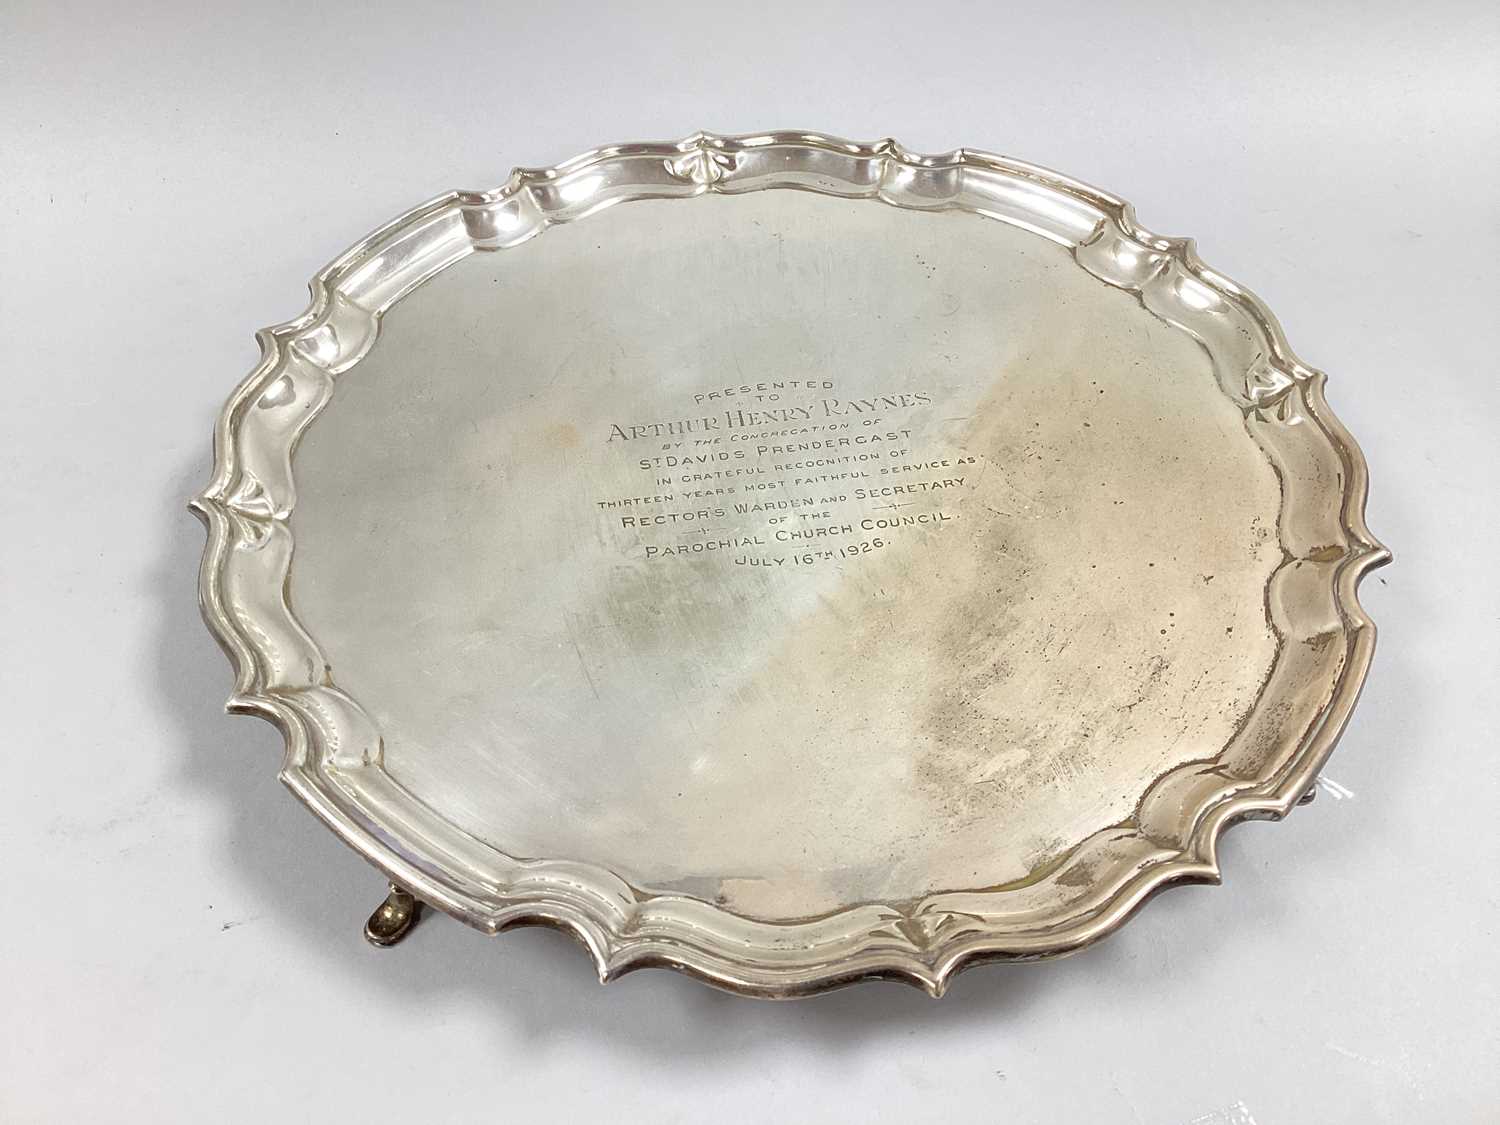 A Chester Hallmarked Silver Salver, HEB FEB, Chester 1925, of shaped circular form, engraved "